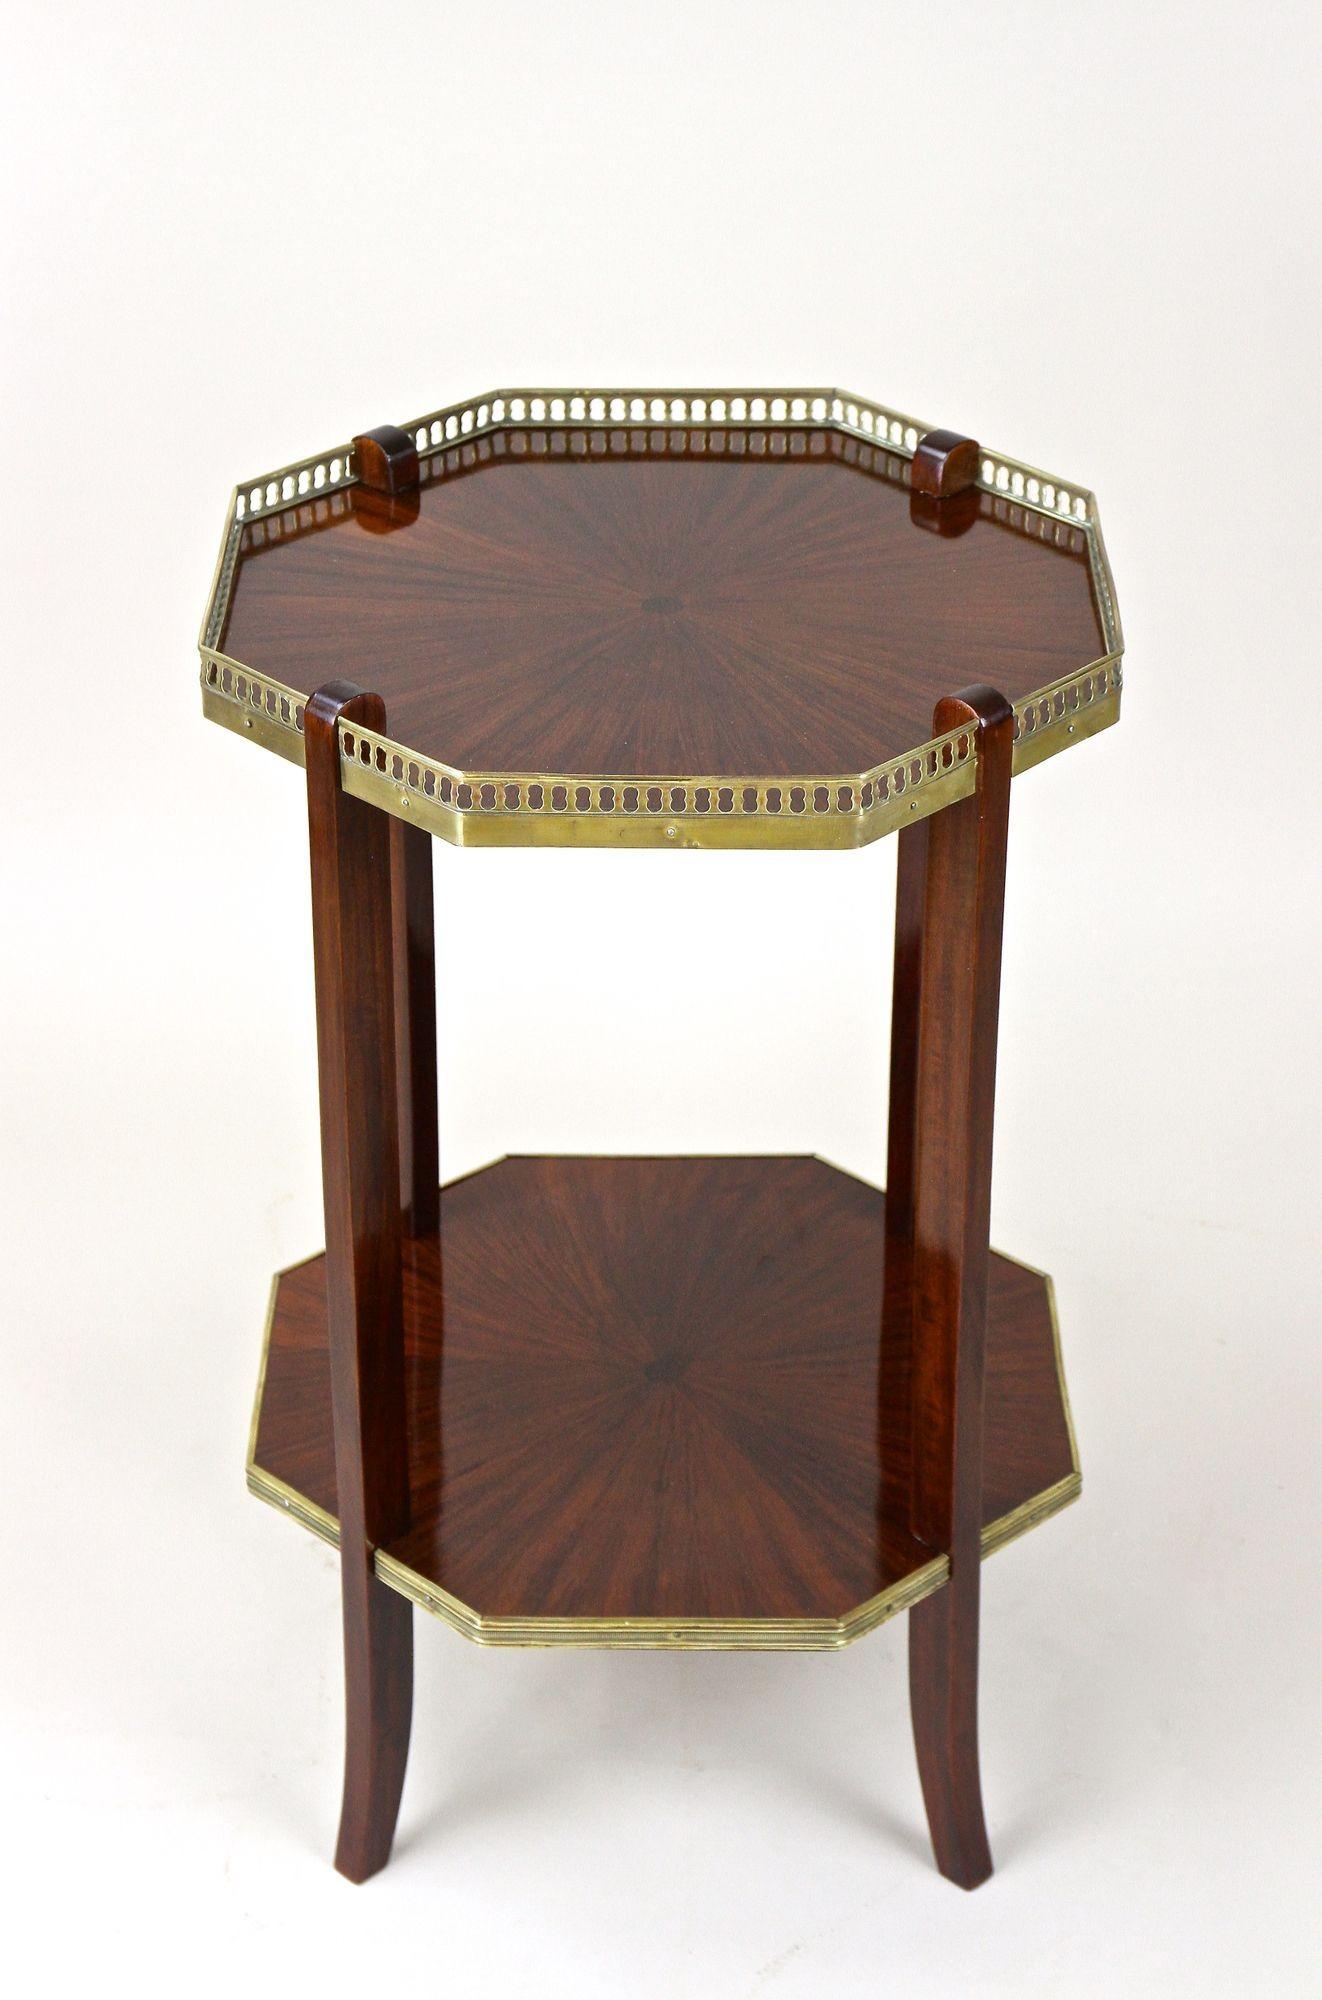 Fantastic looking, completely restored French side table from the renowned Napoleon III period in France around 1870. A unique, octagonal shaped mahogany side table with many delicate and superbly processed details. This antique French side table